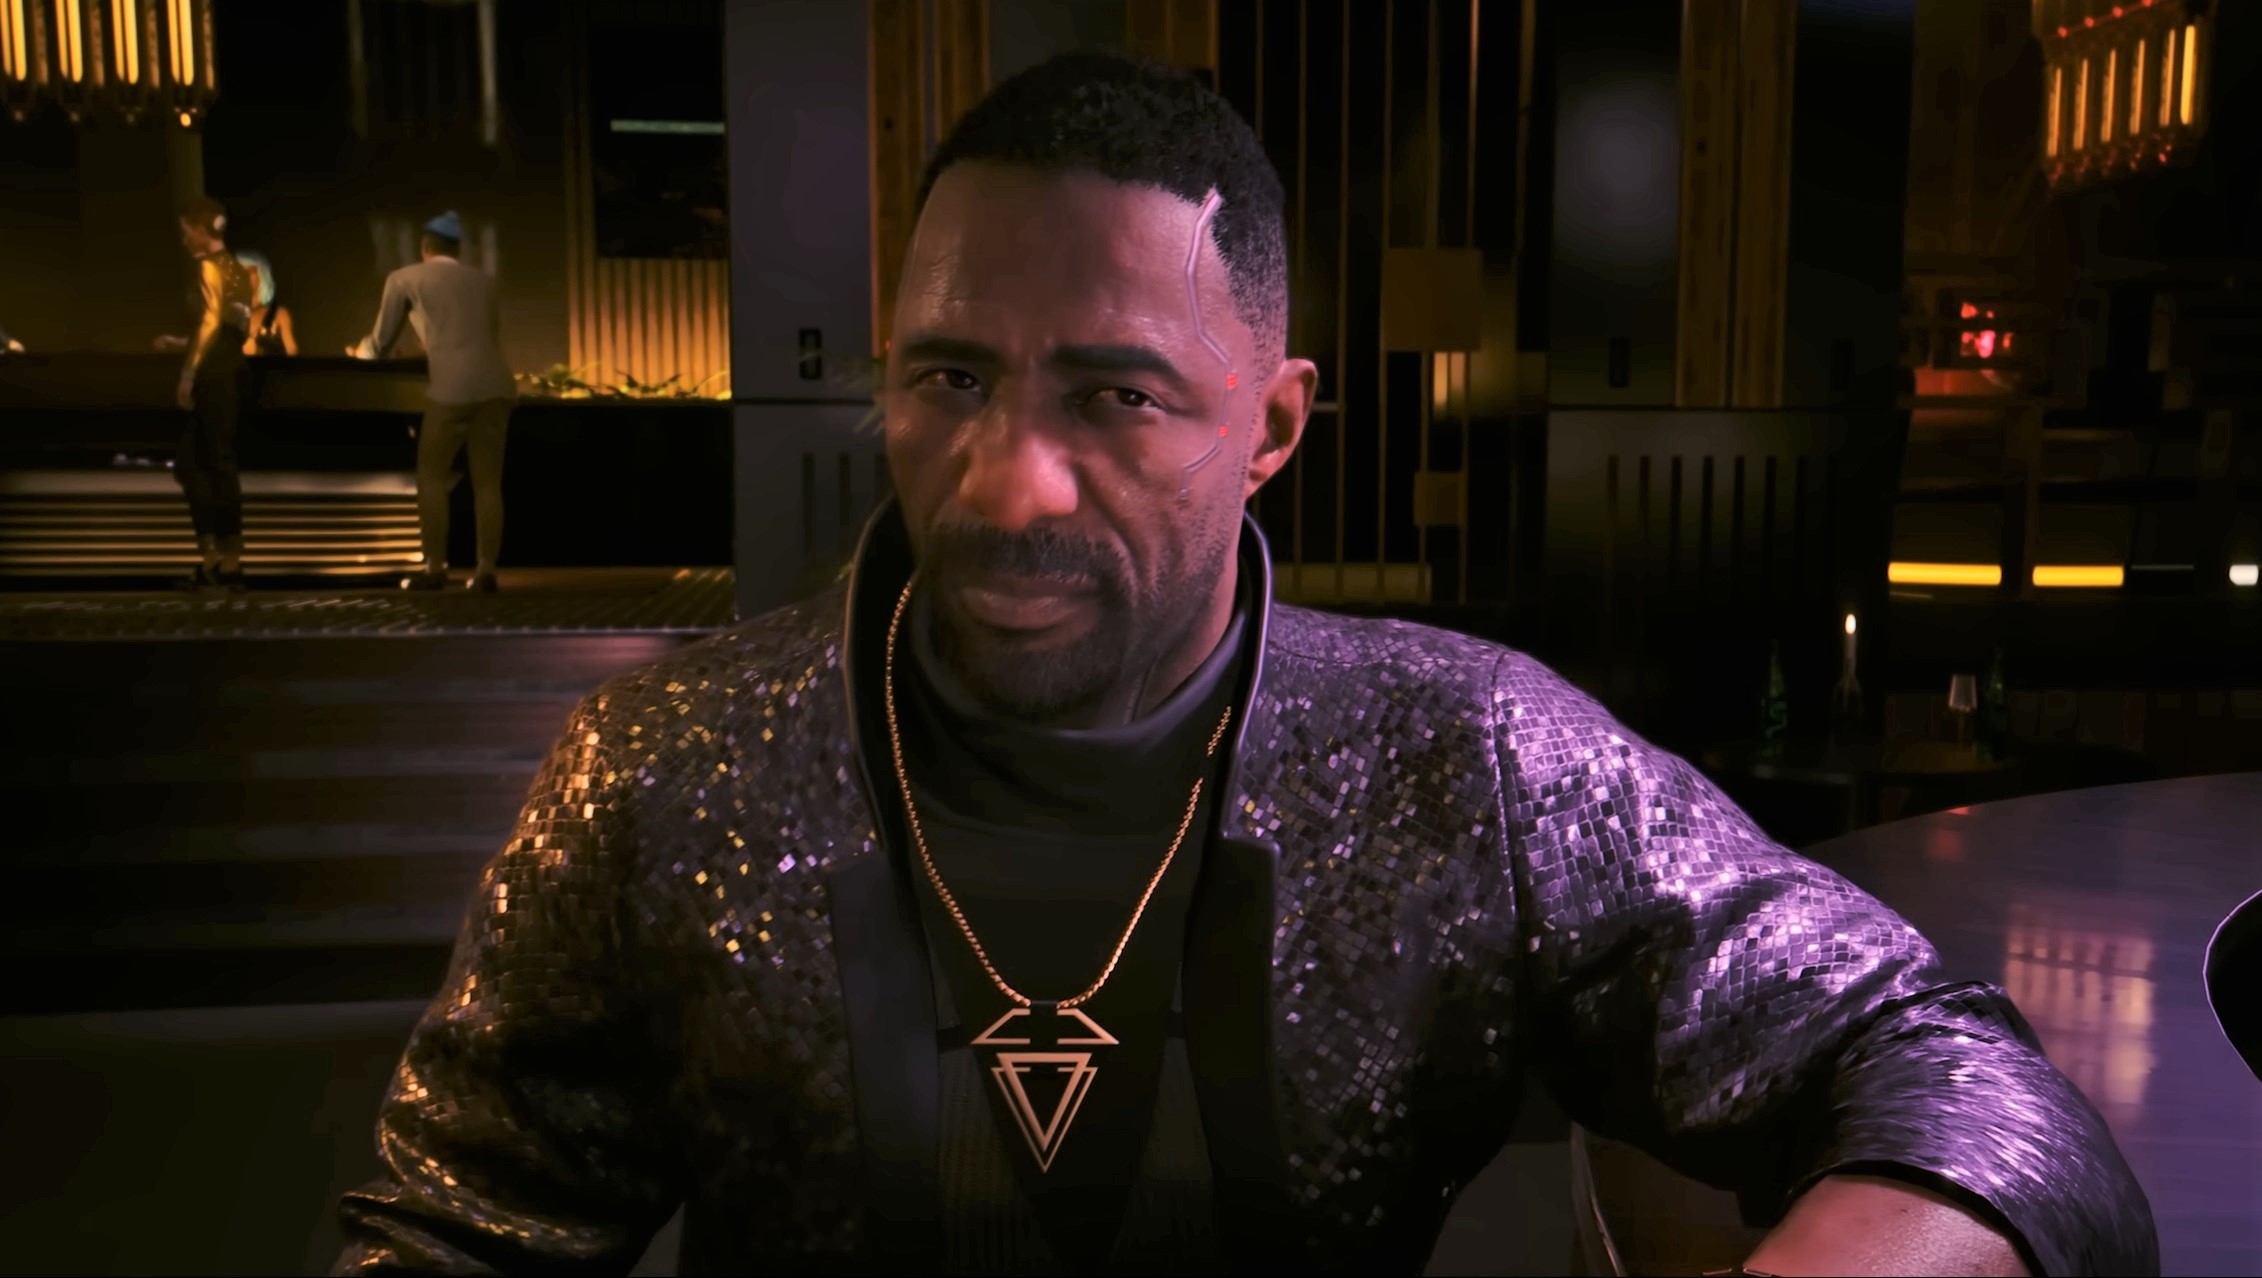 It turns out you can find Idris Elba's Cyberpunk 2077 character hanging out and working a regular job in Night City before the expansion starts